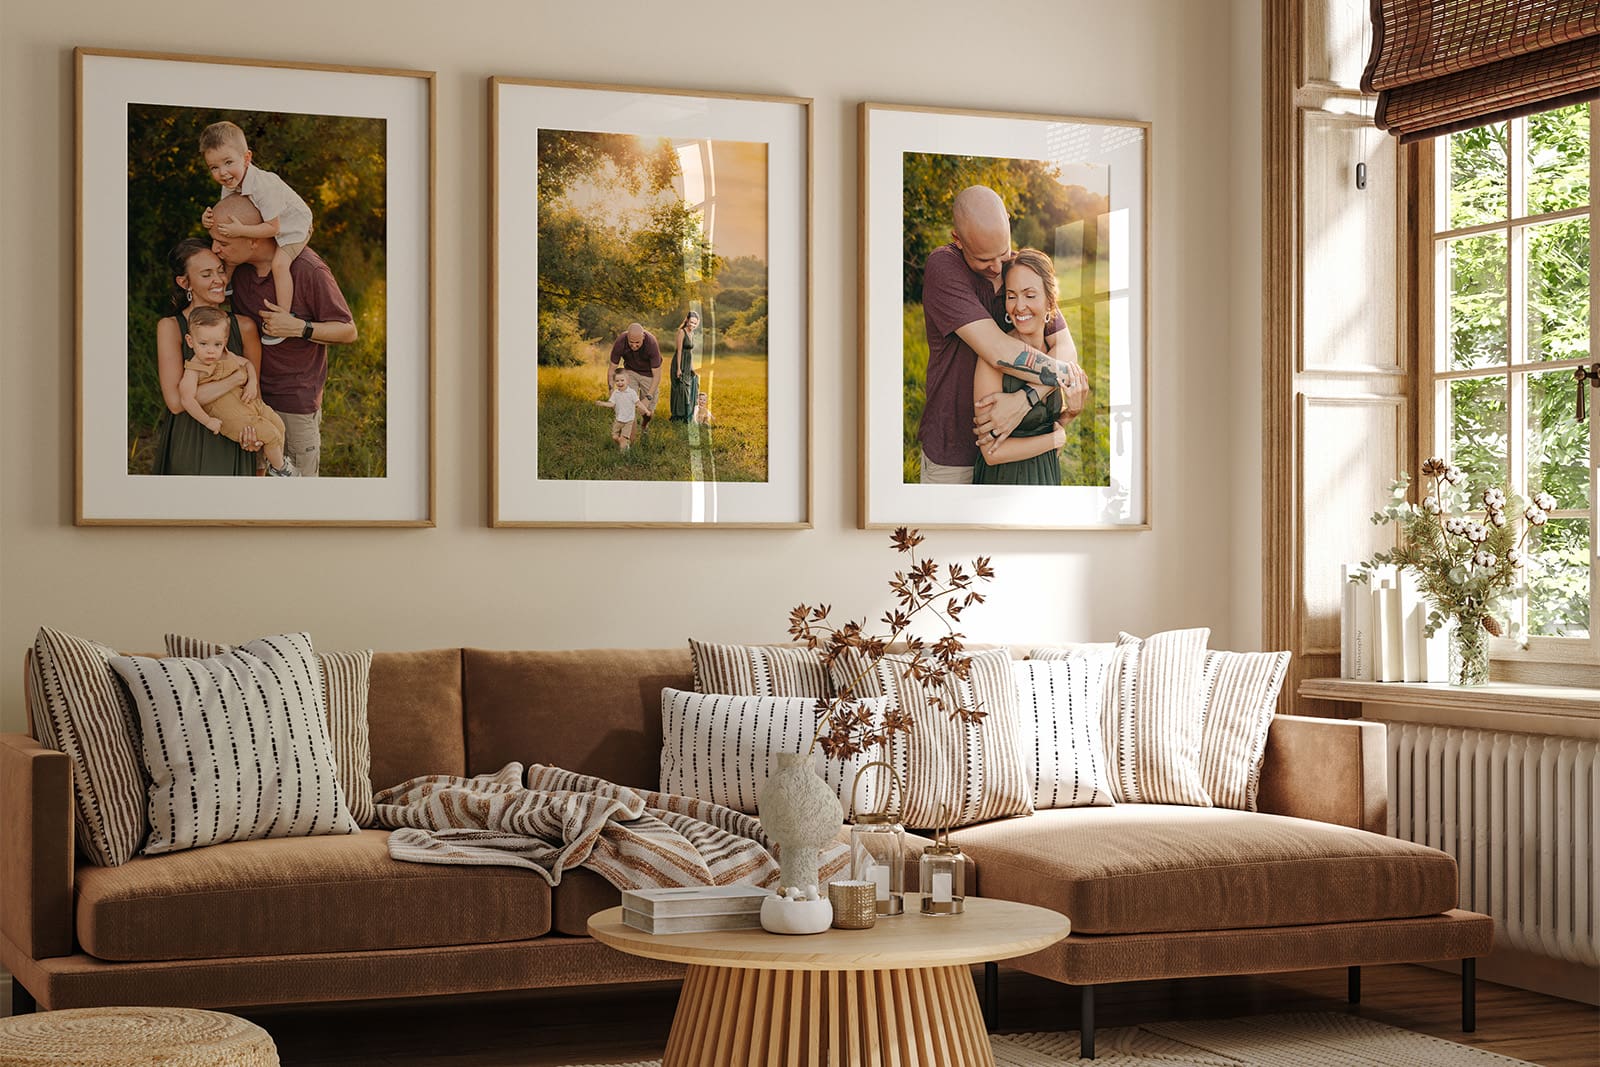 Living room with 3 prints from a family photo session on display.